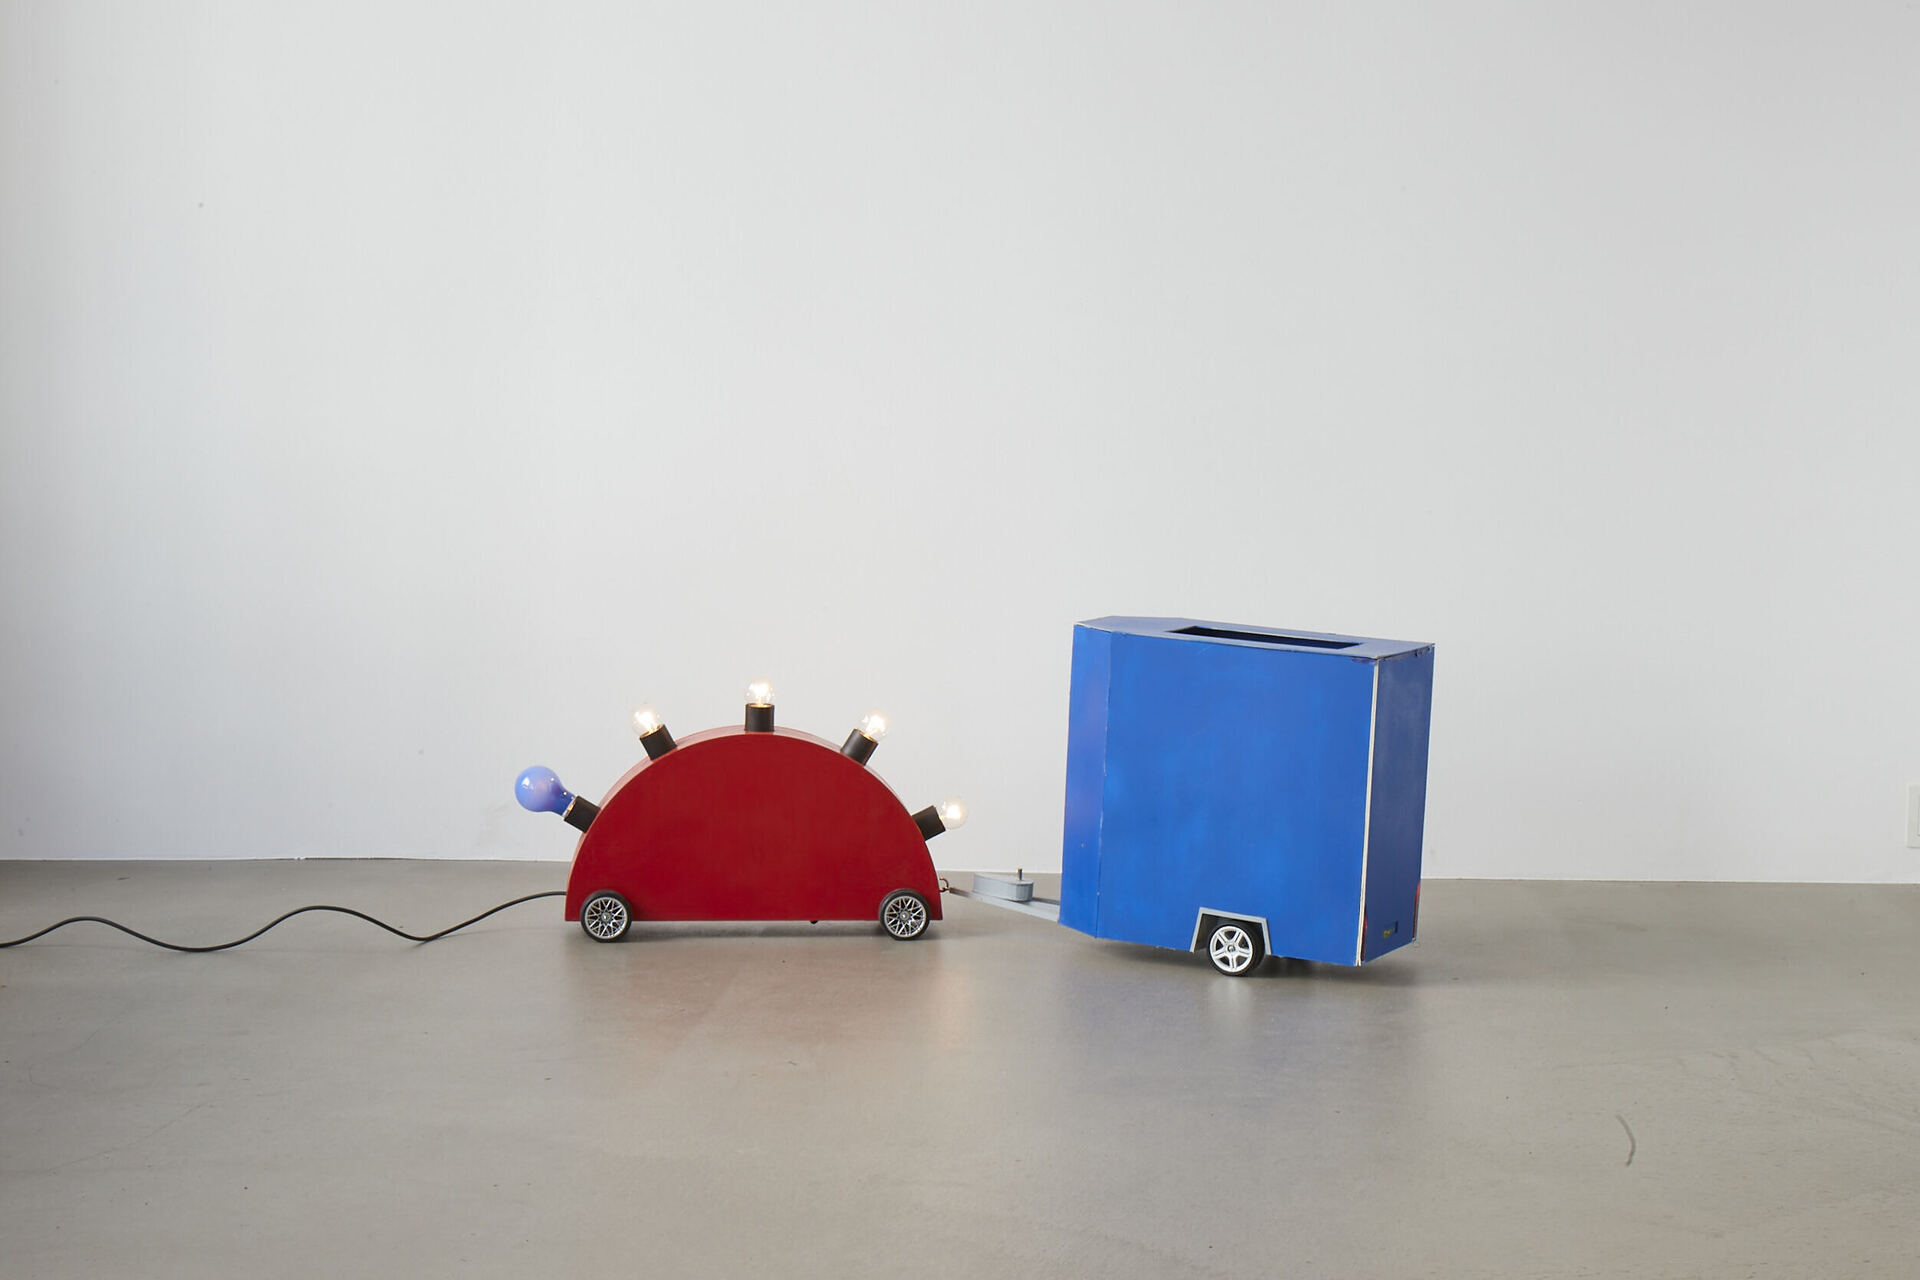 Frieder Haller, Memphis Blues (after Martine Bedin) I, 2021 Wood, wire, board, electrical wiring, five light bulbs and model car wheels 40,7 × 120 × 20,5 cm / 16 × 47.2 × 8 inches